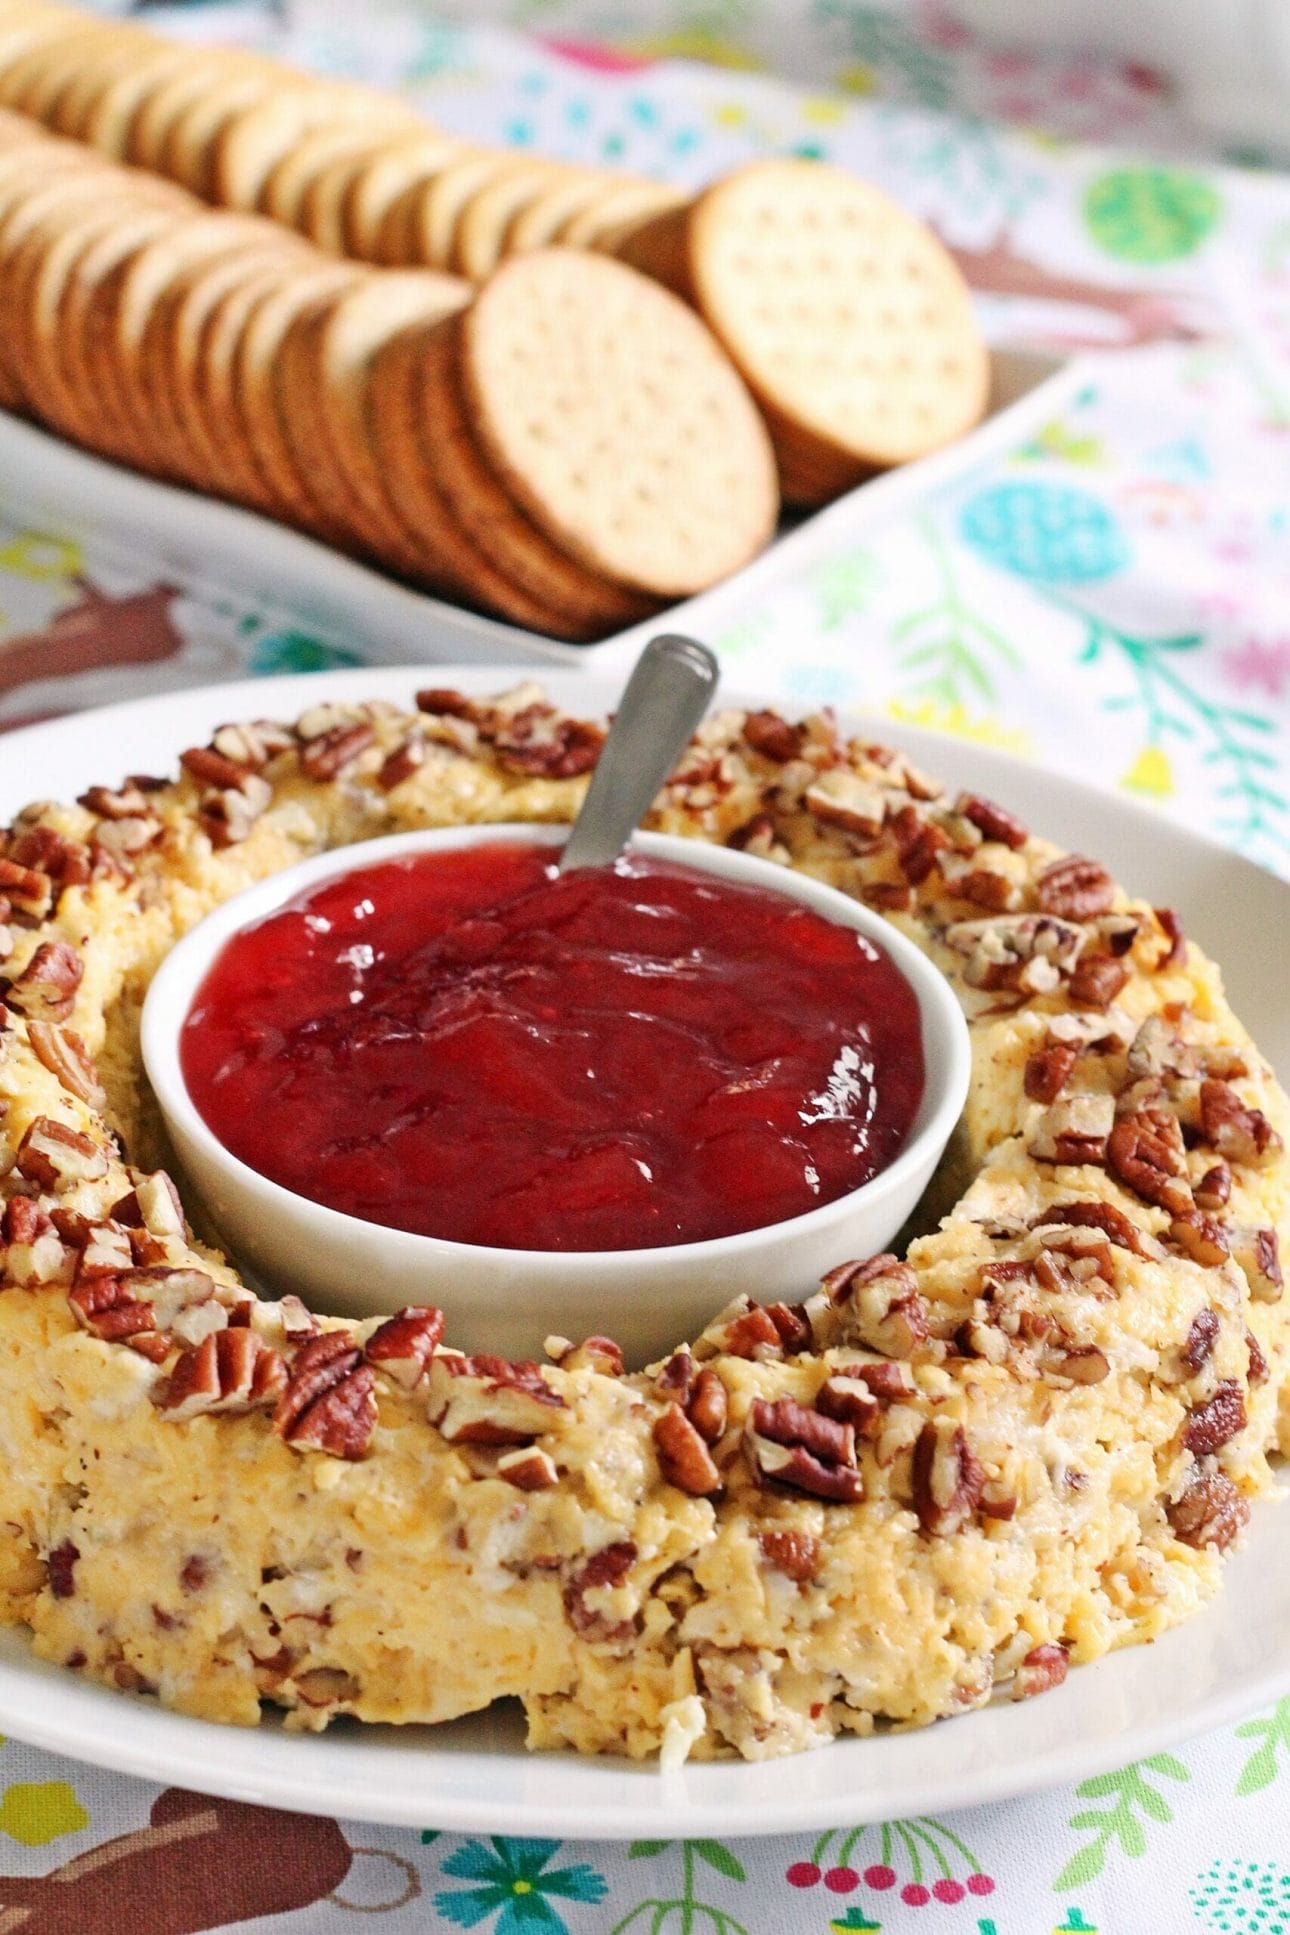 Cheddar Pecan Ring with Strawberry Preserves